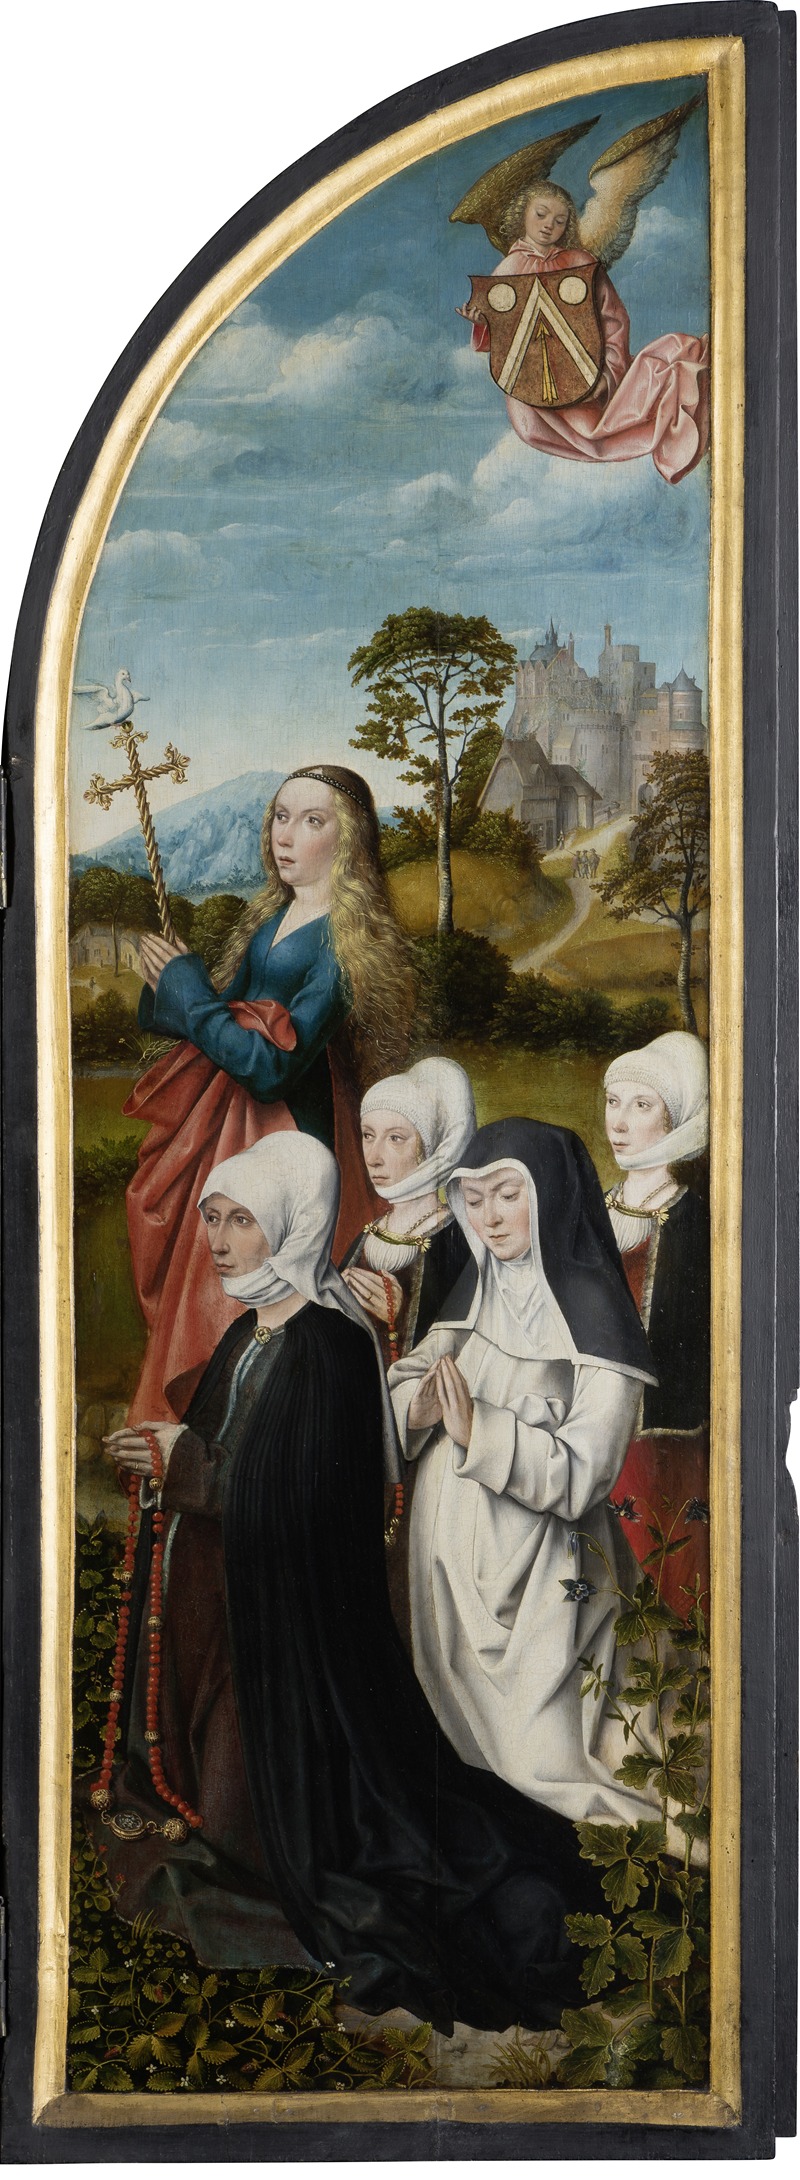 Master of Frankfurt - St Margret with Donors